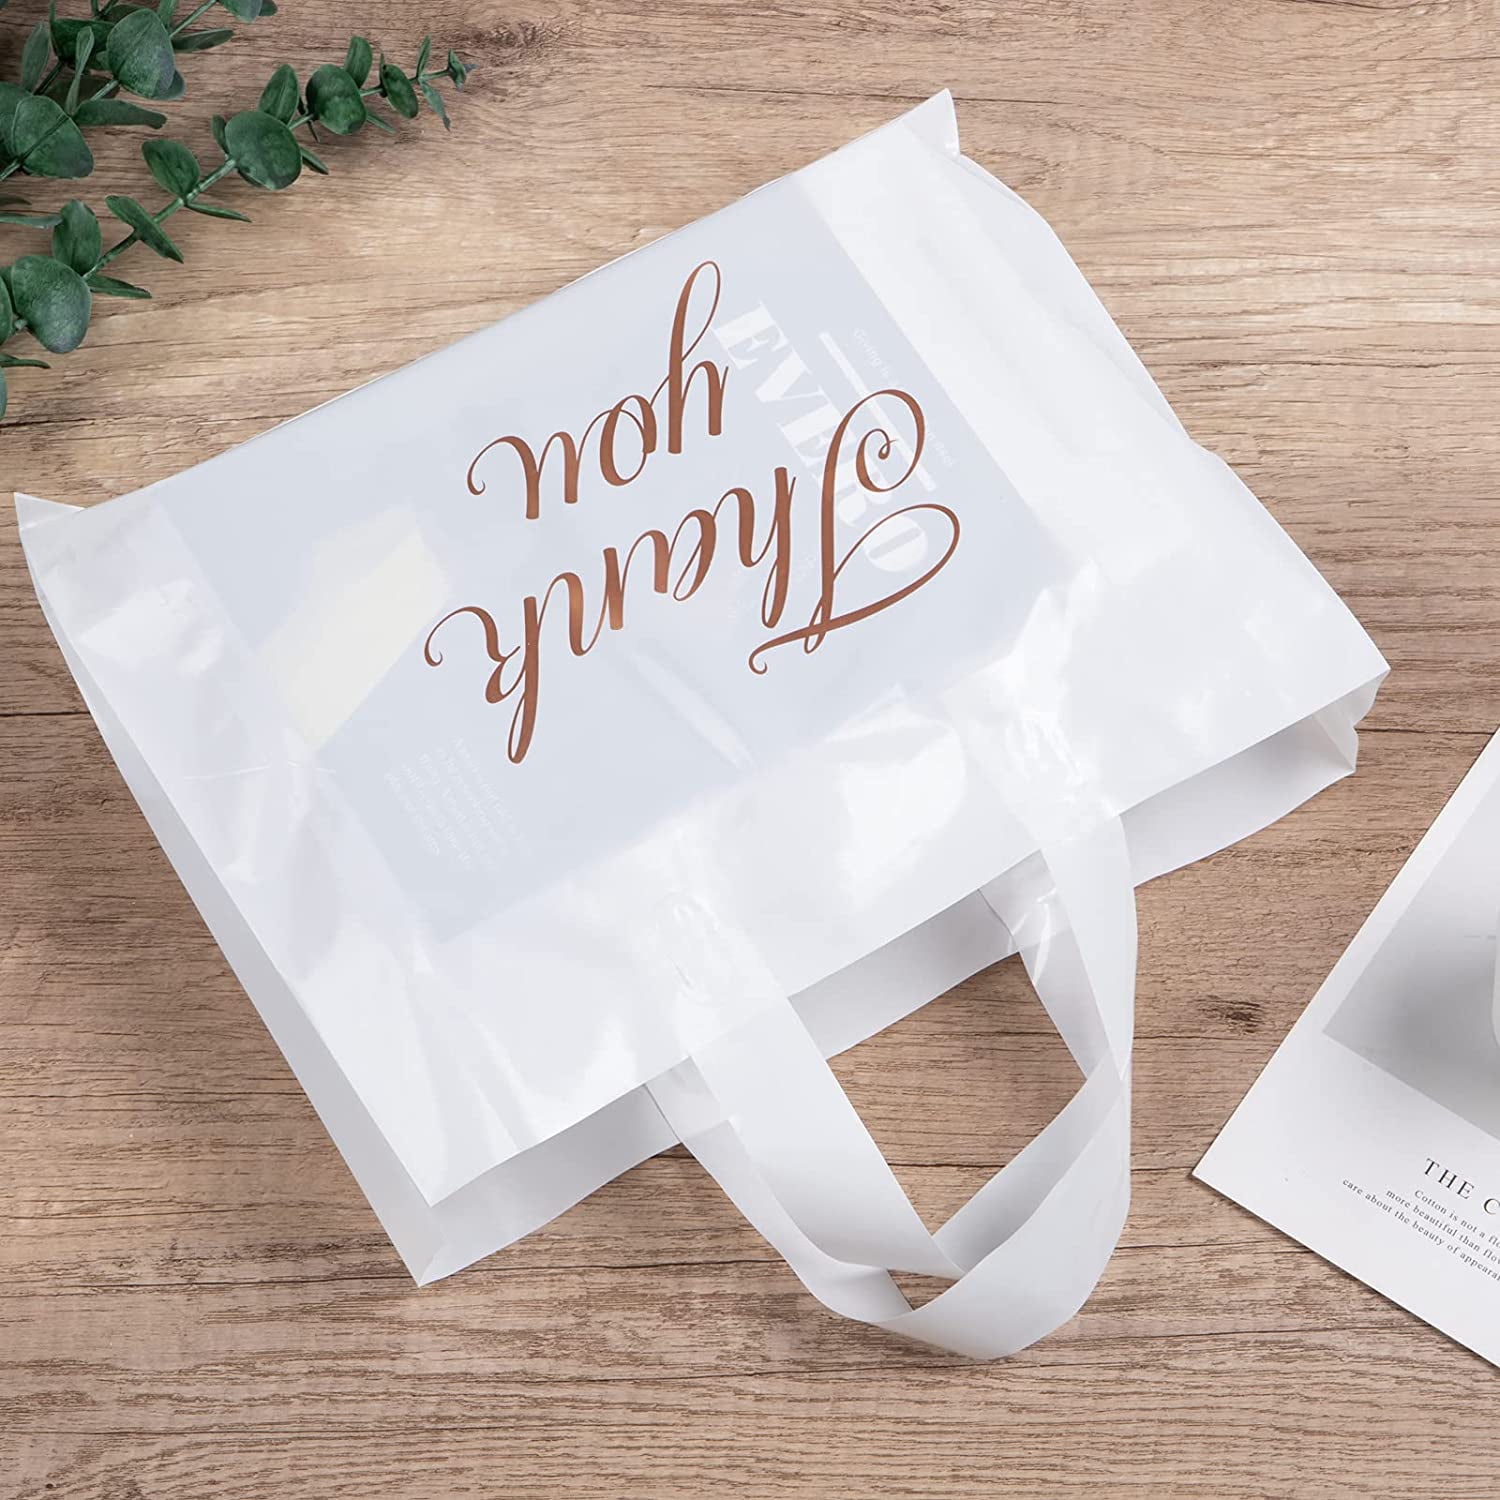 10 x 12 Inch 2.36 Mil Thick Retail Shopping Thank You Bags Goodie Bag with Die Cut Handles Reusable Bags for Store 120 Pieces Thank You Merchandise Bags Boutique White and Rose Gold Present 